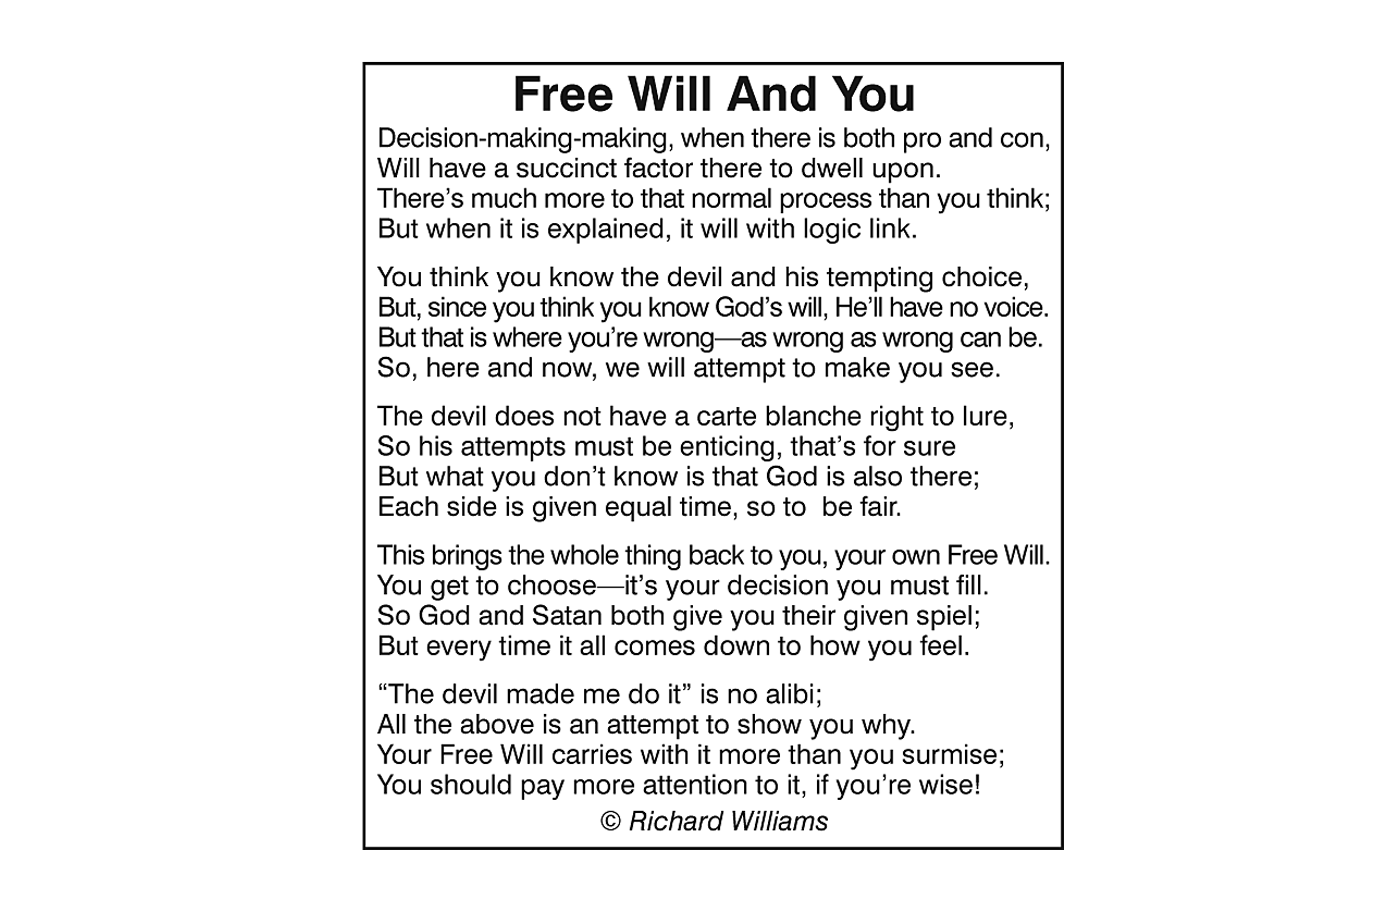 Richard Williams Poem: Free Will and You